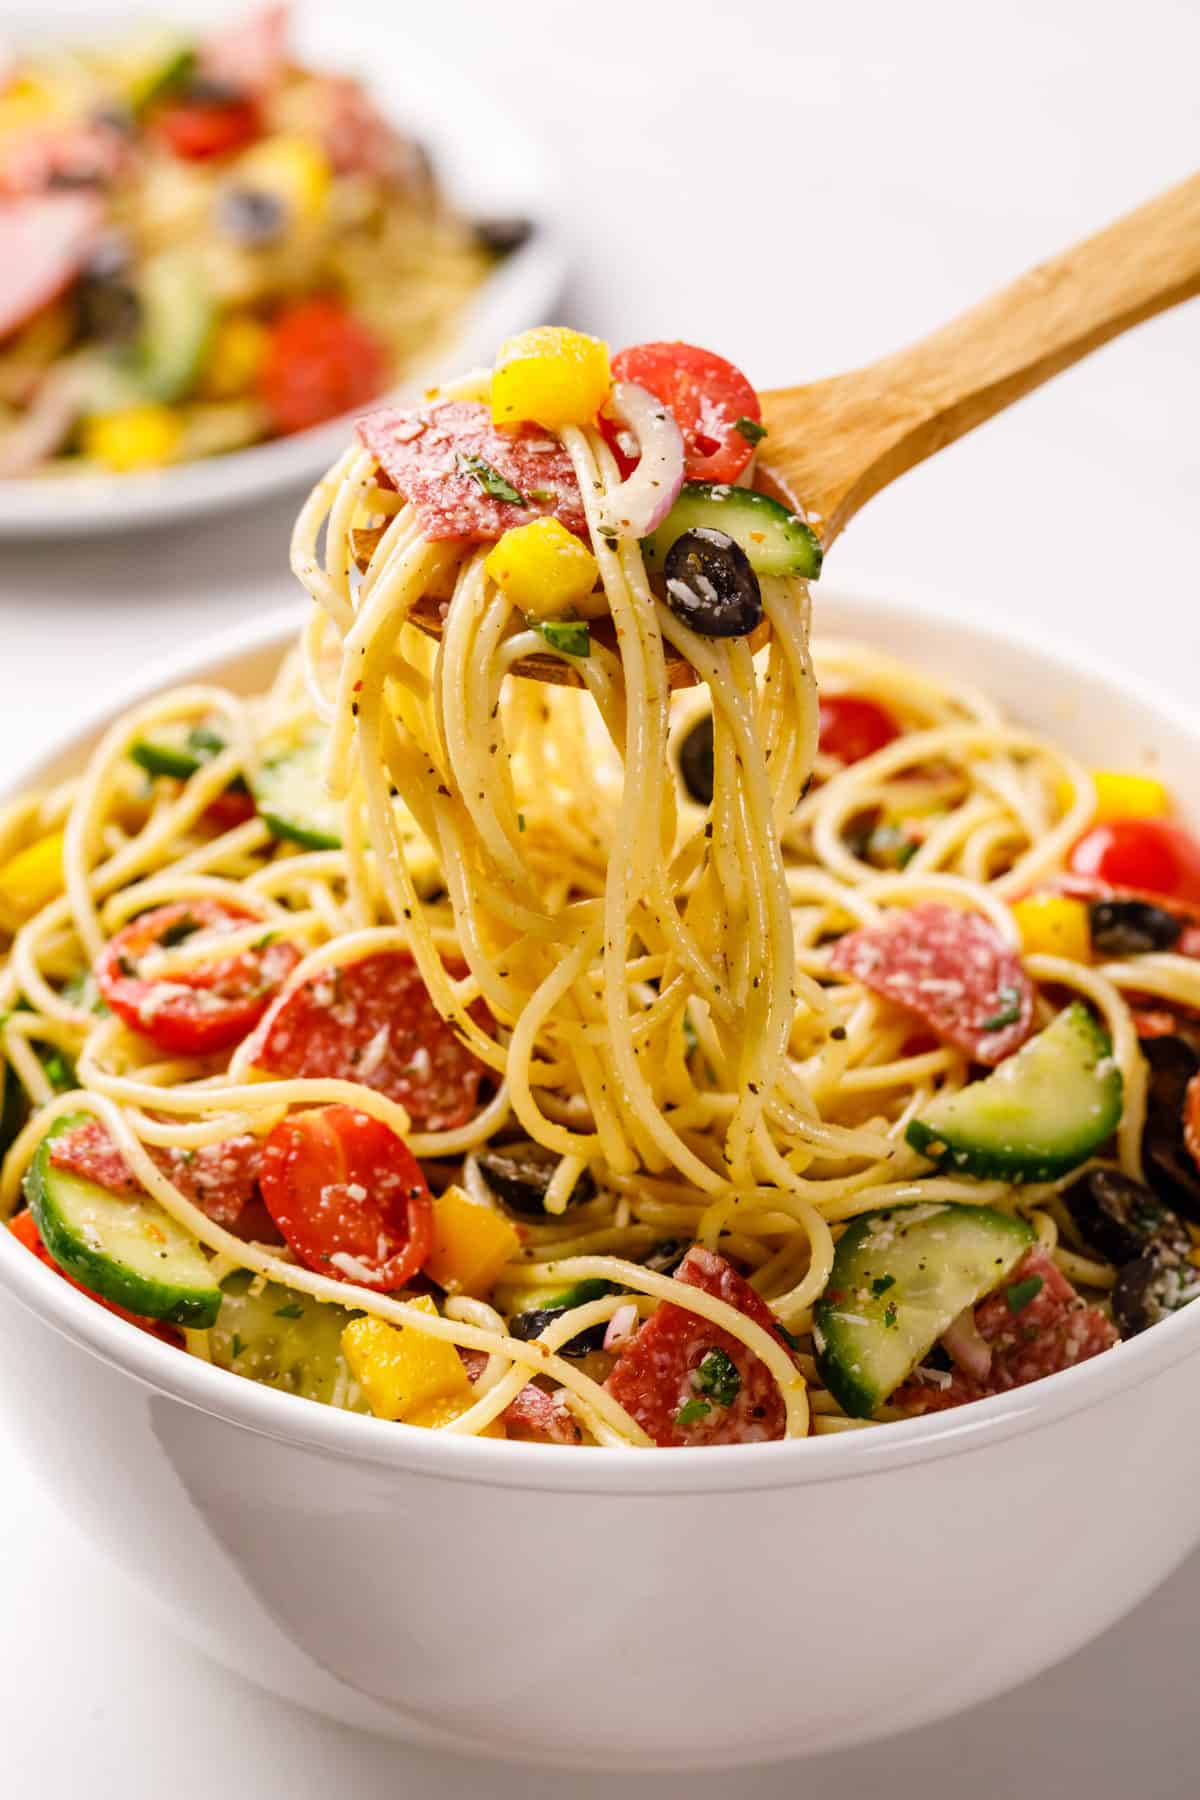 spaghetti salad served in a white bowl with a wooden spoon